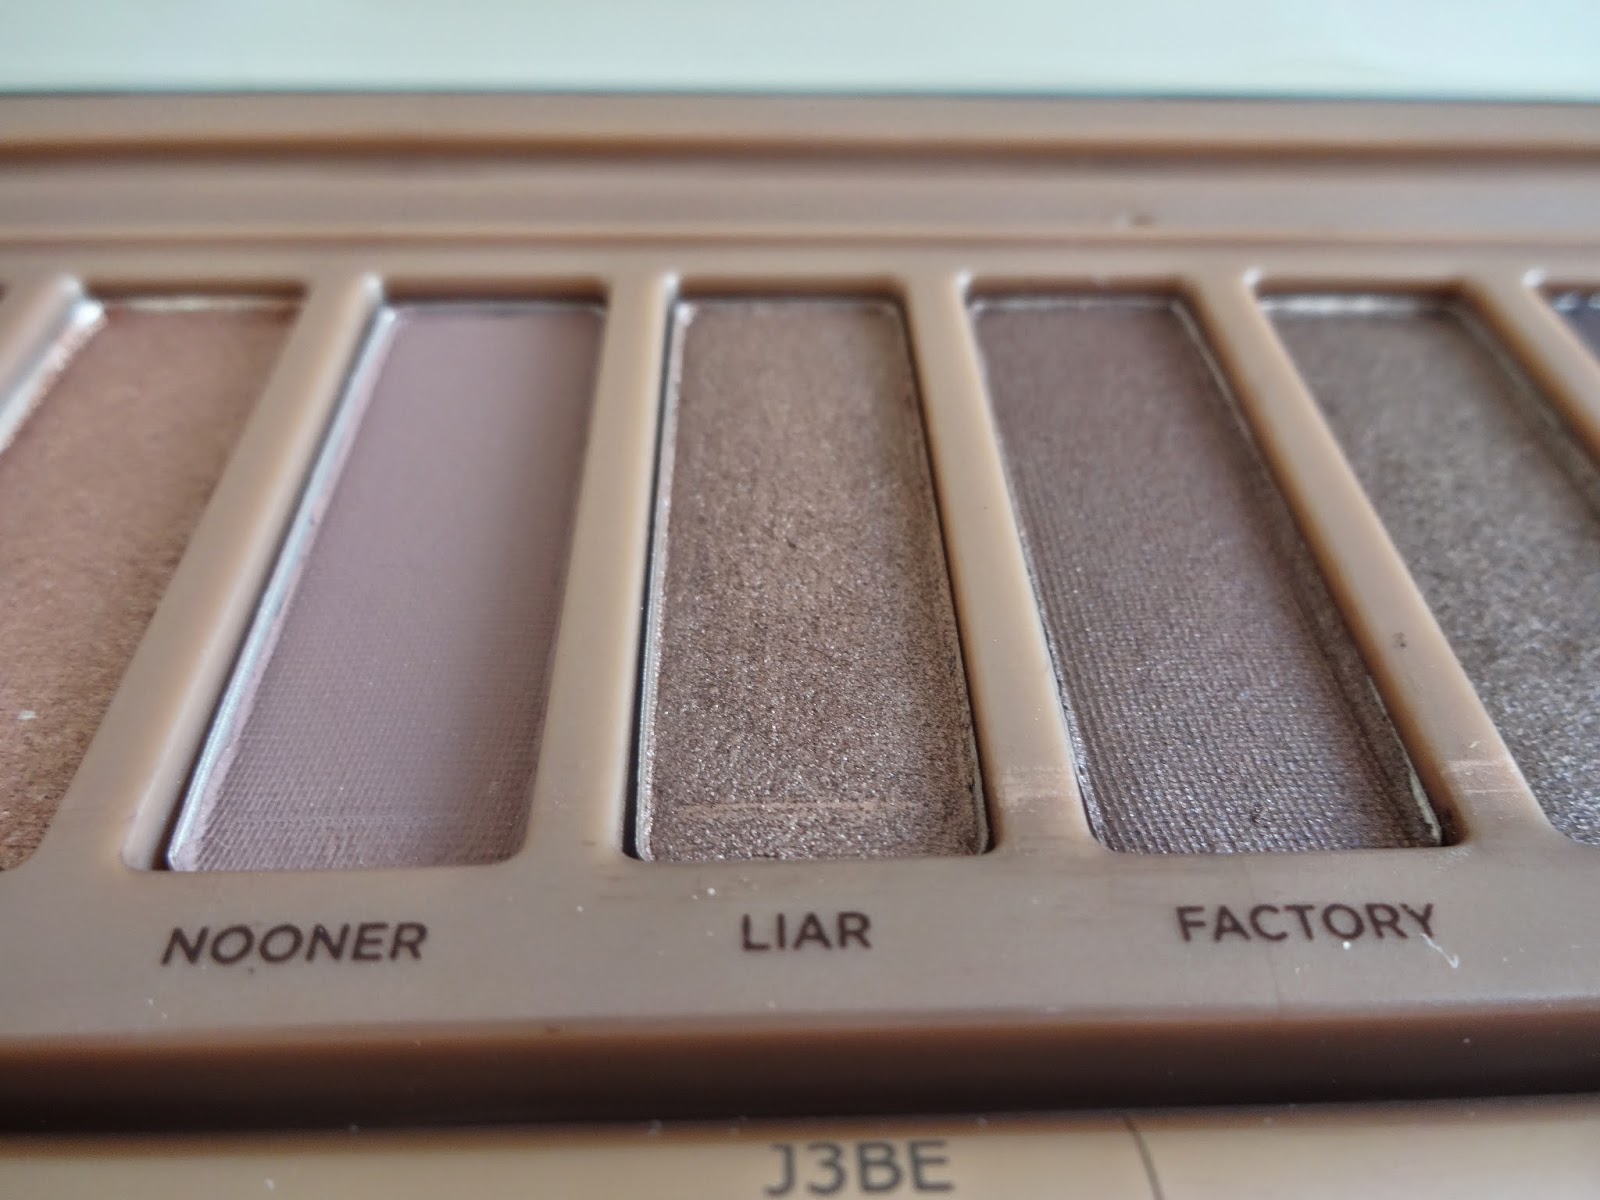 Urban Decay Naked 3 Palette Review + Giveaway (closed) 5